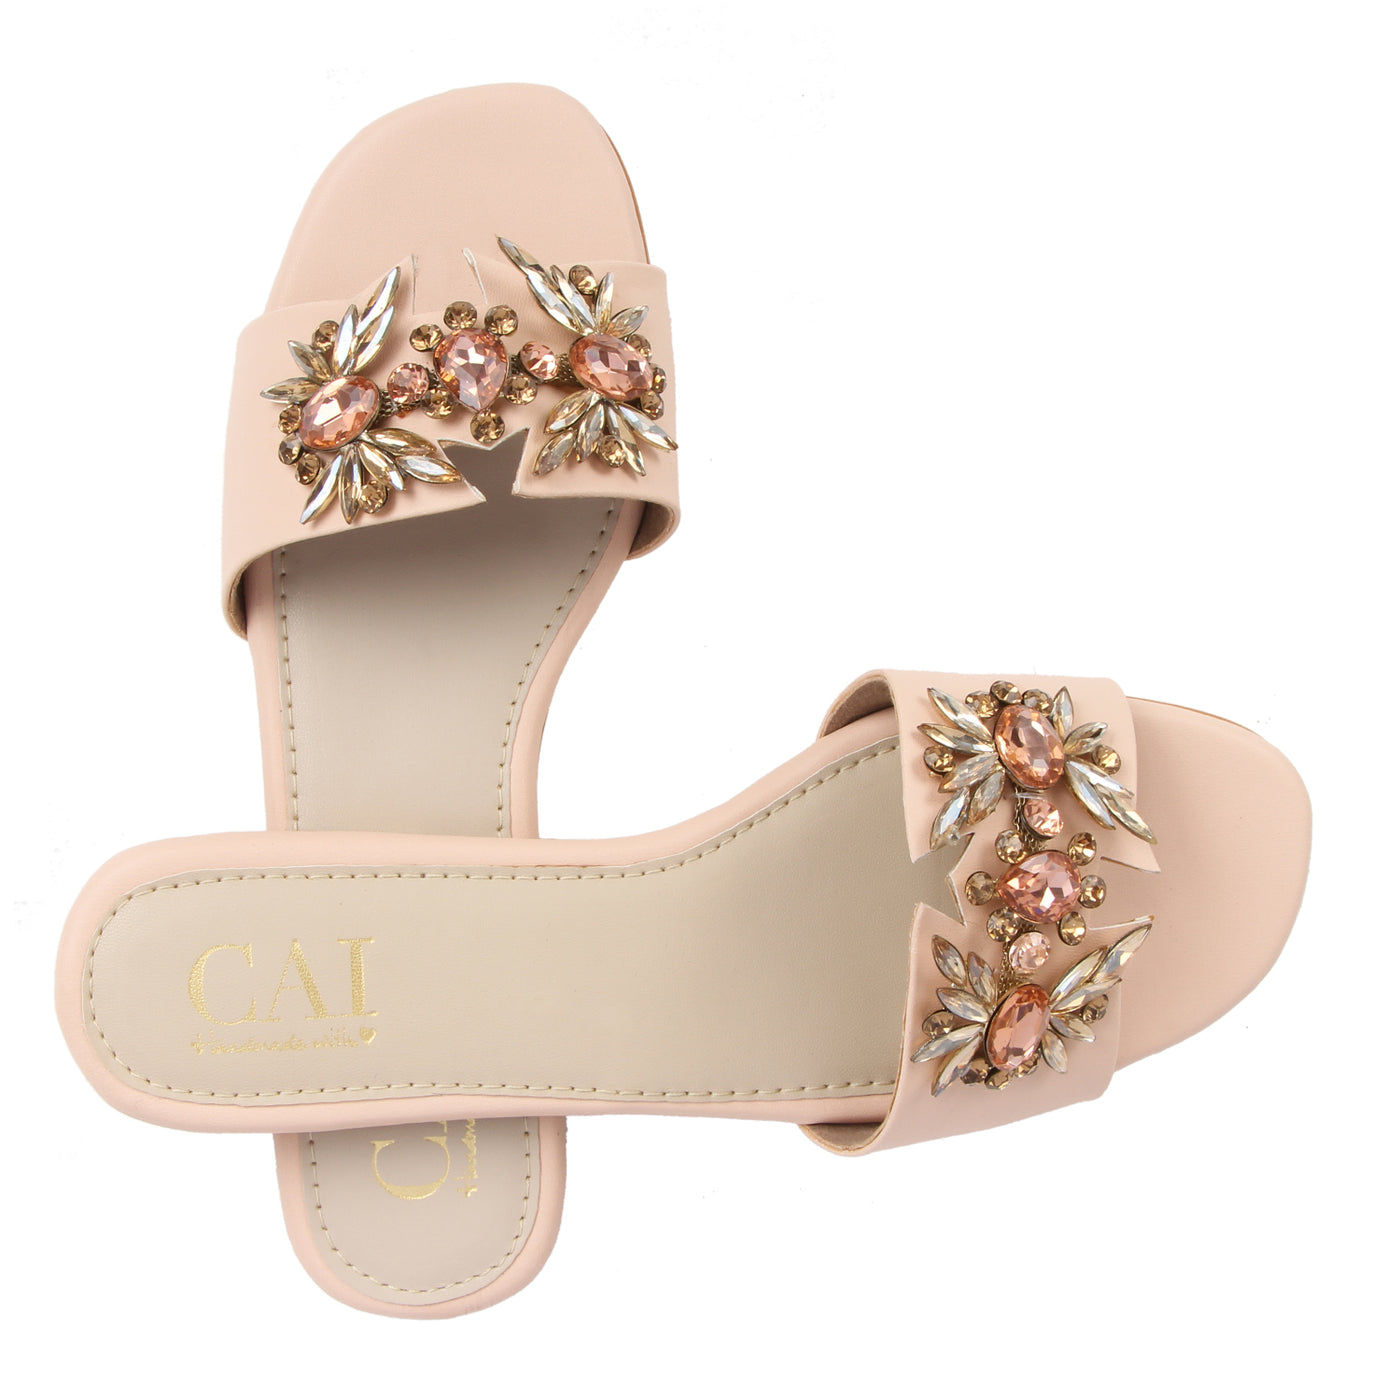 sandals for women online at cai store